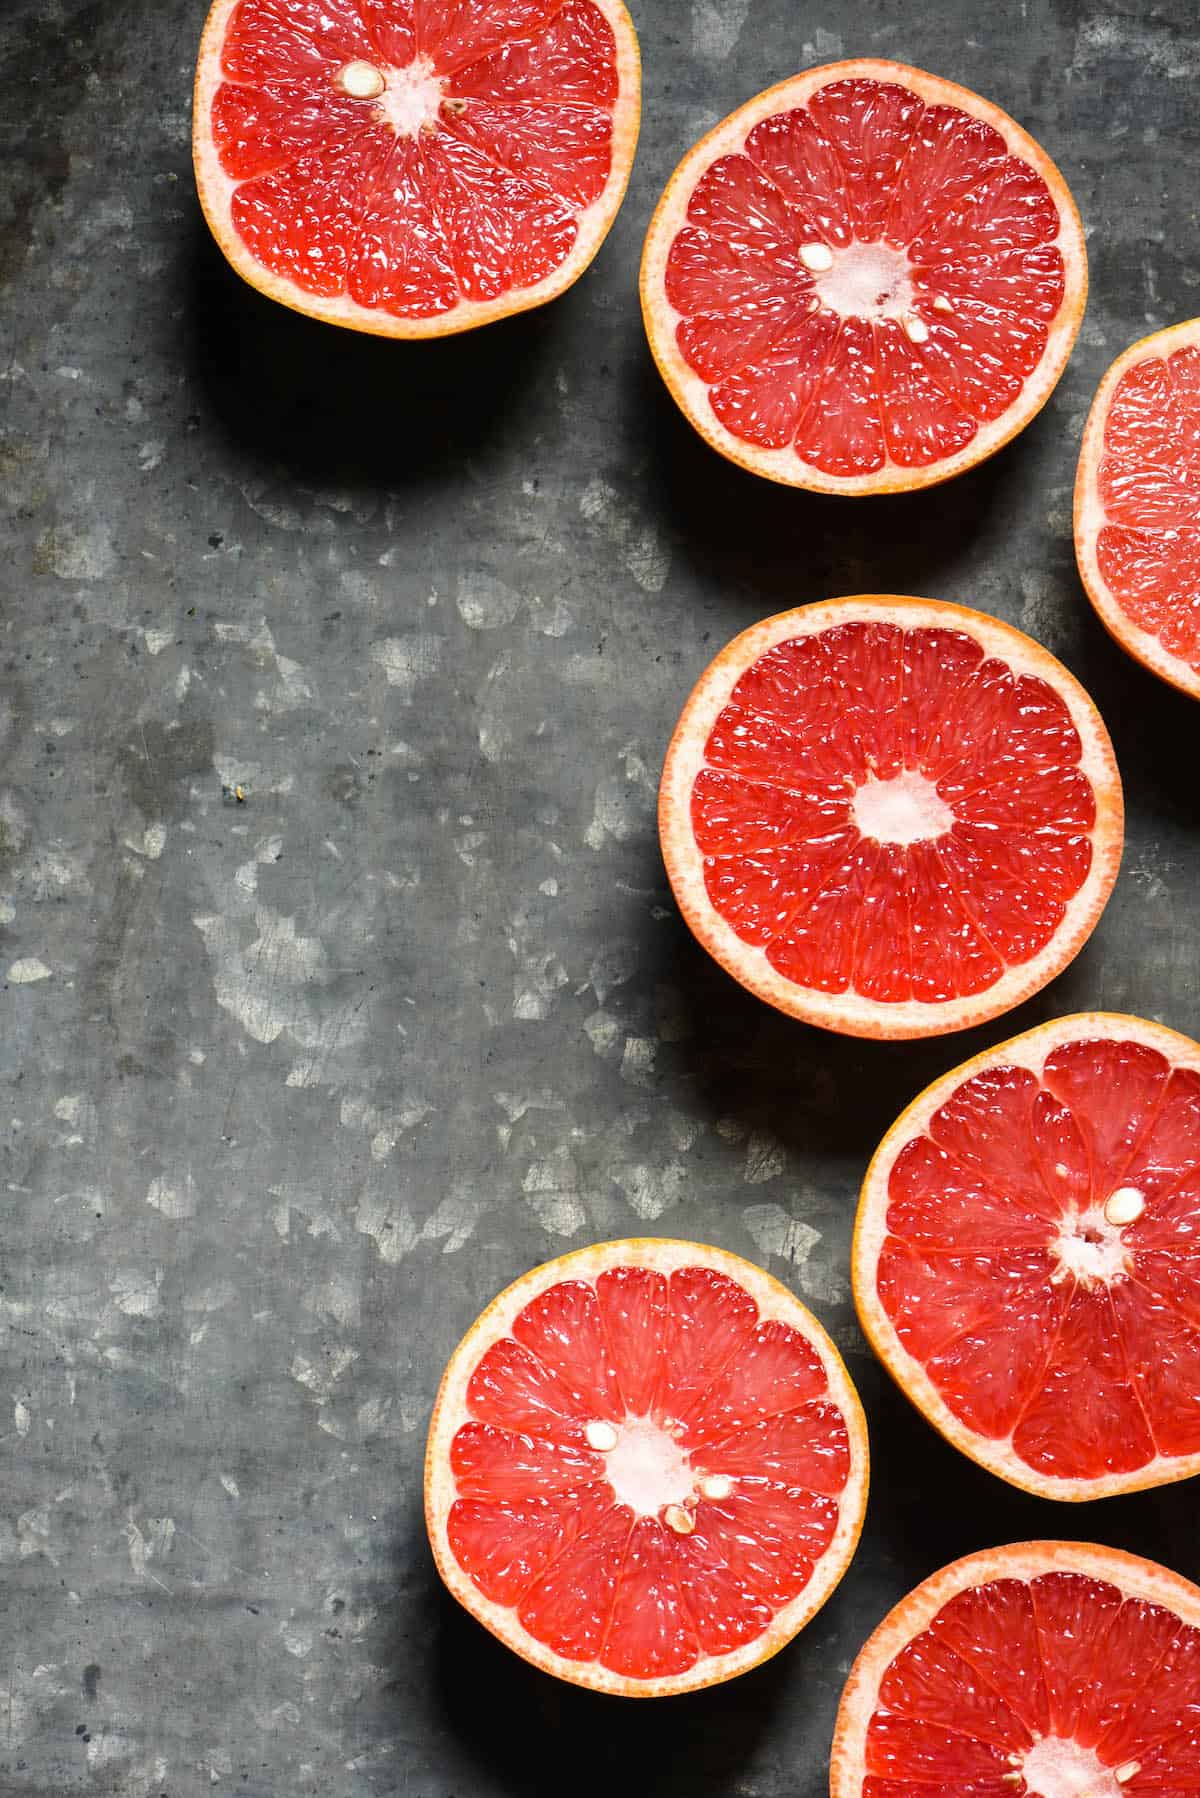 11 Grapefruit Recipes to Brighten Your Winter - Bring some happy flavor to a cold day with an appetizer, cocktail, breakfast, salad, lunch or dinner celebrating juicy, sweet grapefruit! | foxeslovelemons.com